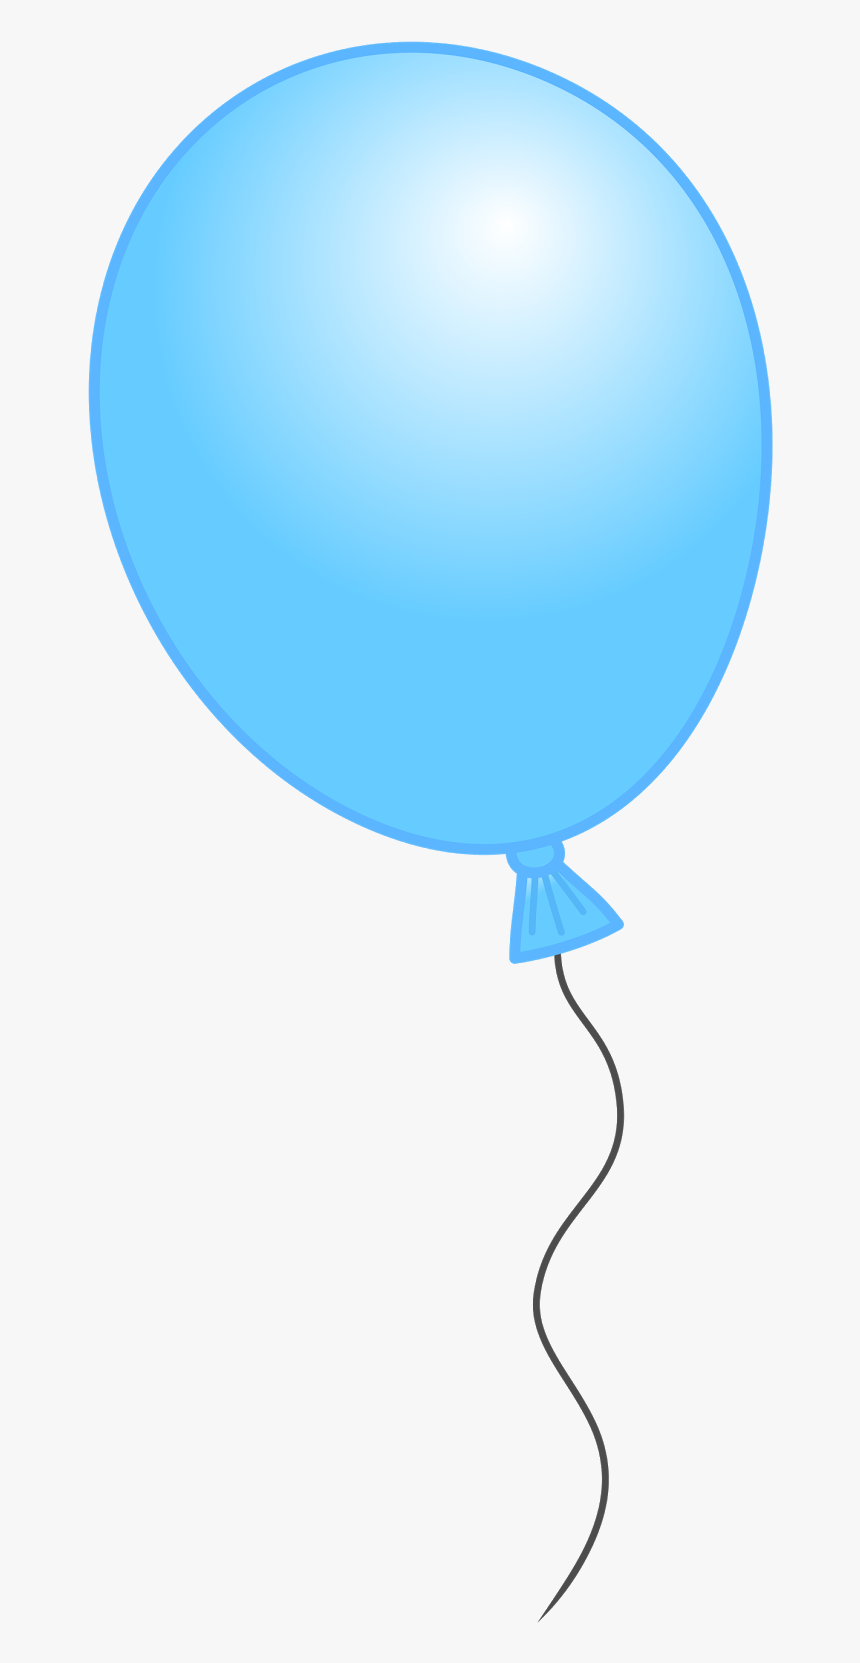 Blue Balloon Png - Balloon, Transparent Png, Free Download